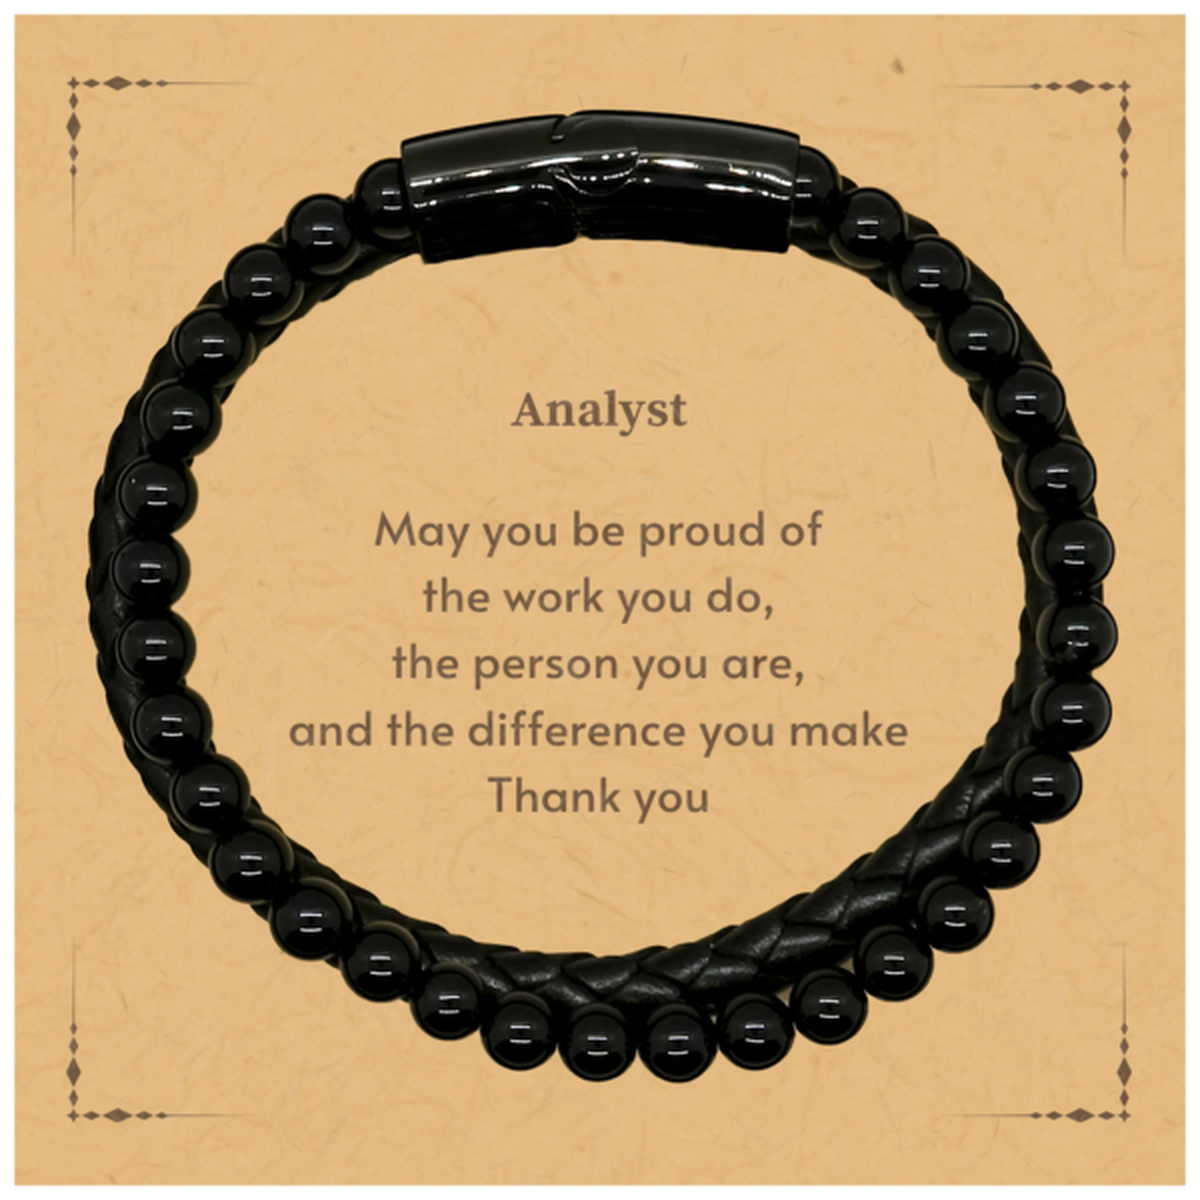 Heartwarming Stone Leather Bracelets Retirement Coworkers Gifts for Analyst, Analyst May You be proud of the work you do, the person you are Gifts for Boss Men Women Friends